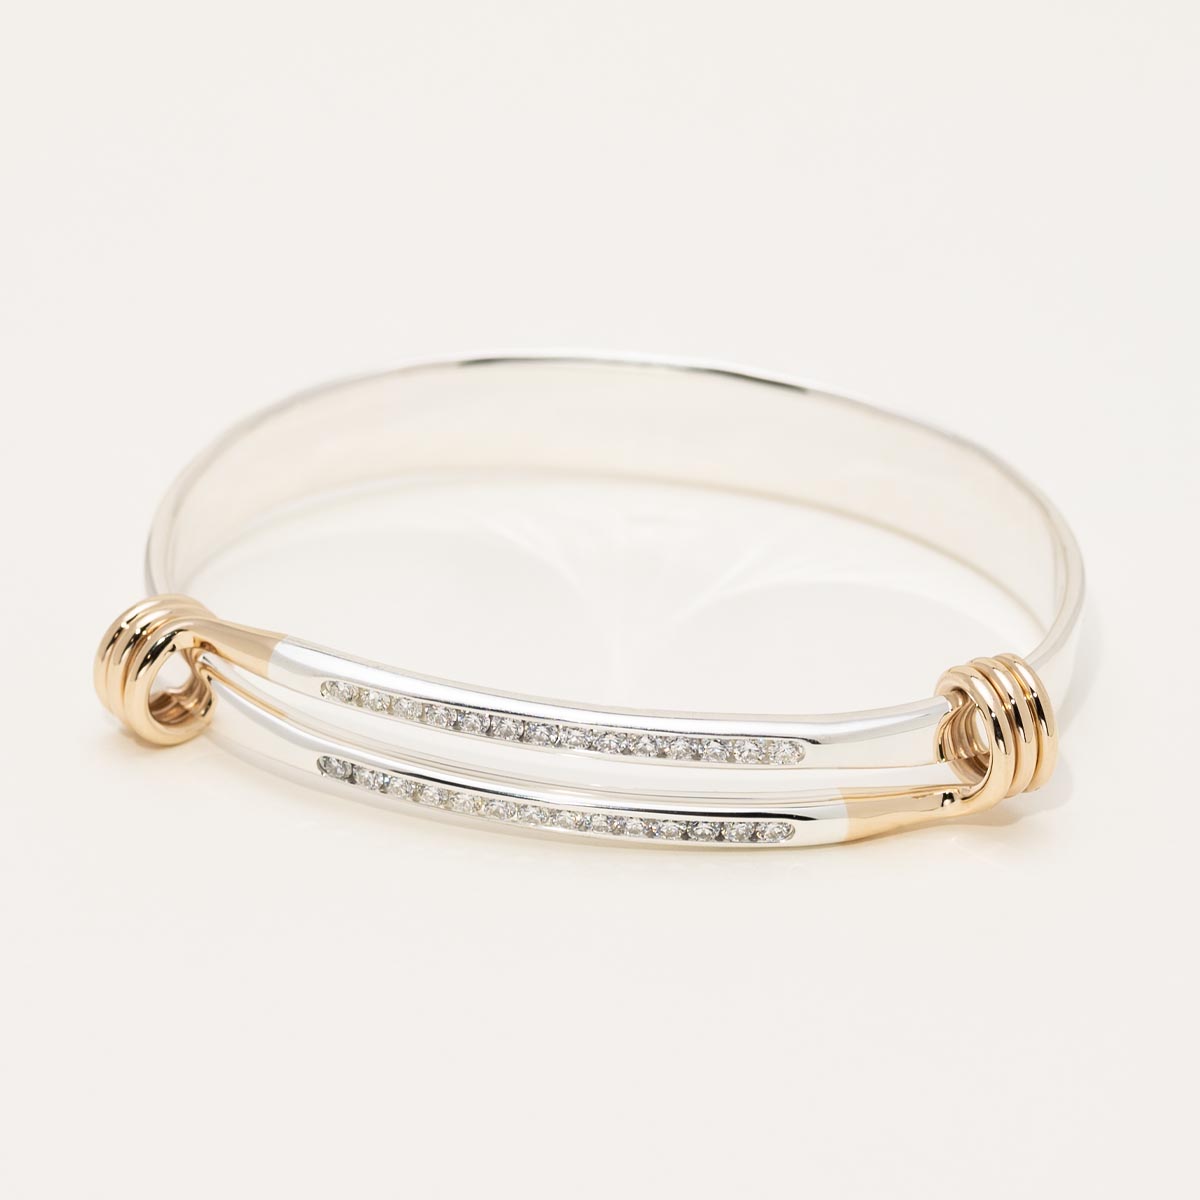 E.L. Designs Grand Diamond Signature Bracelet in Sterling Silver and 14kt Yellow Gold (7/8ct tw)